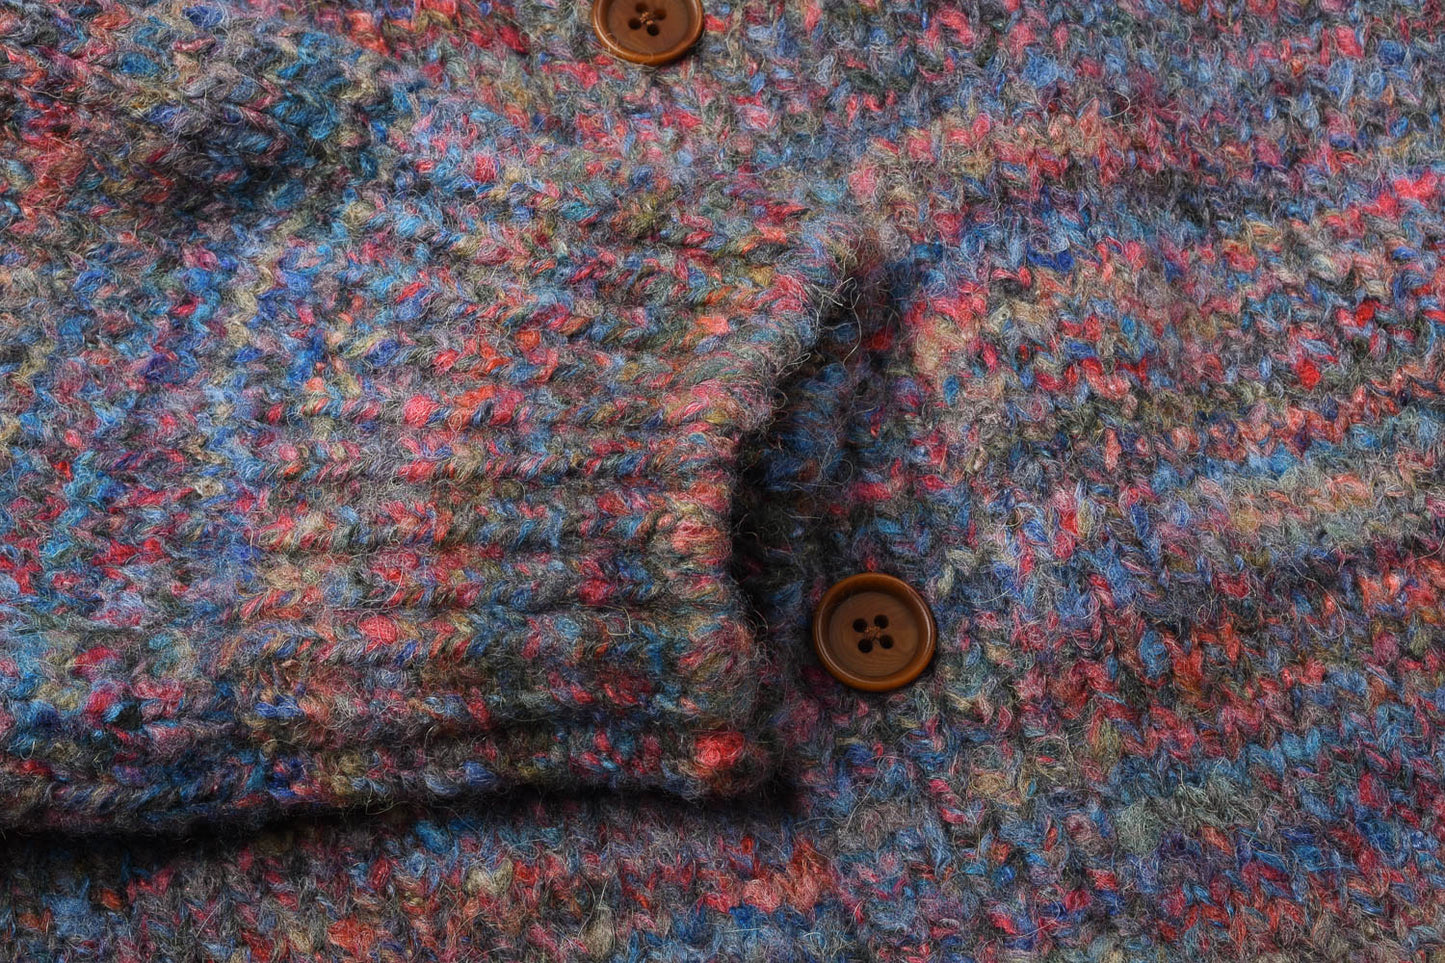 TS(S) HAND DYED YARN MIX COLOR KNIT CARDIGAN - MIX